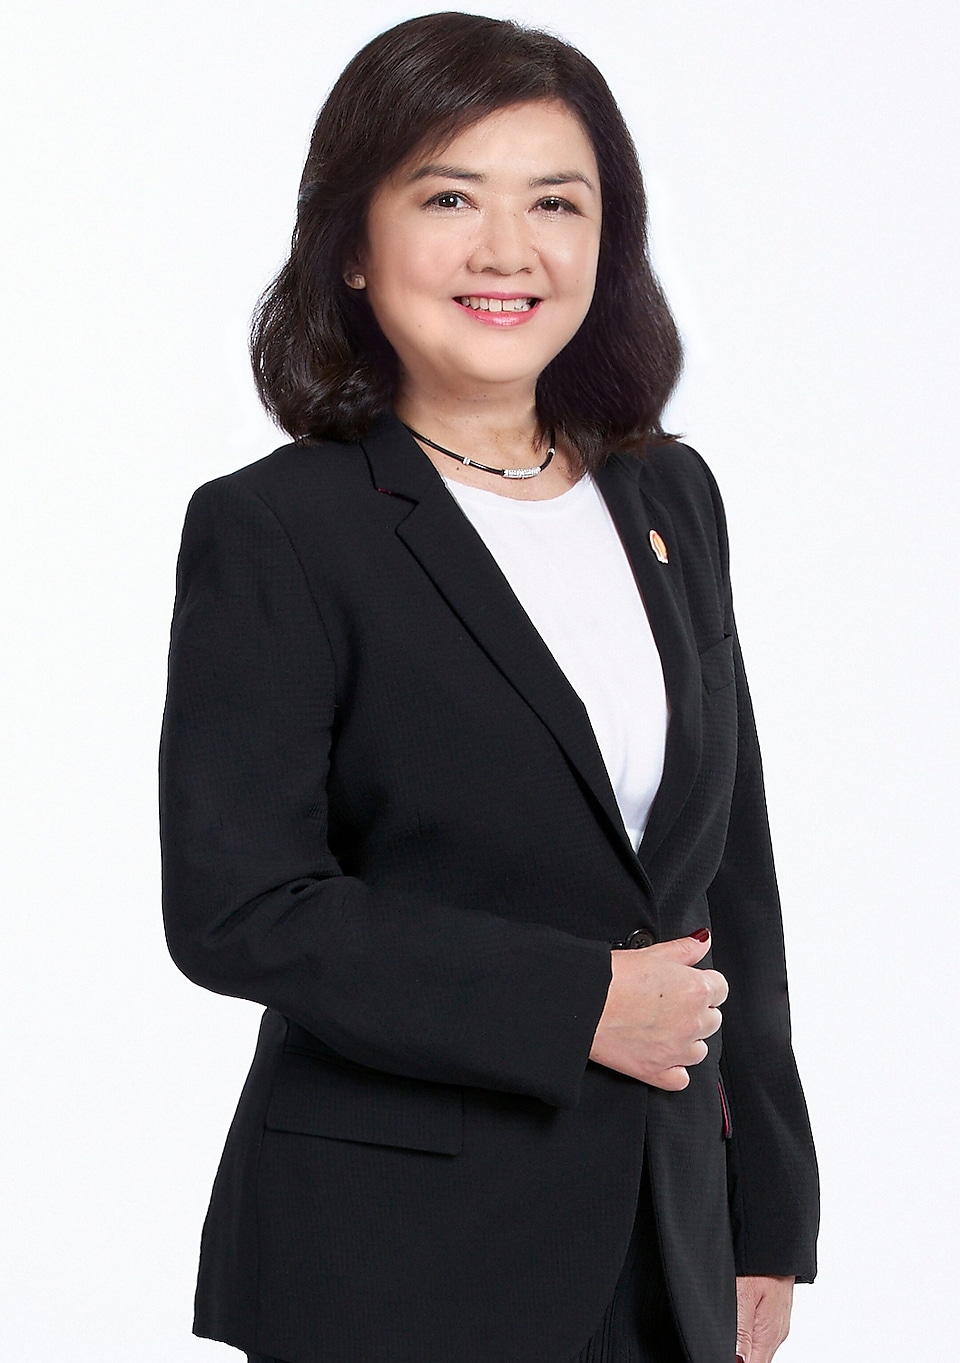 photo of veethara in suit thailand